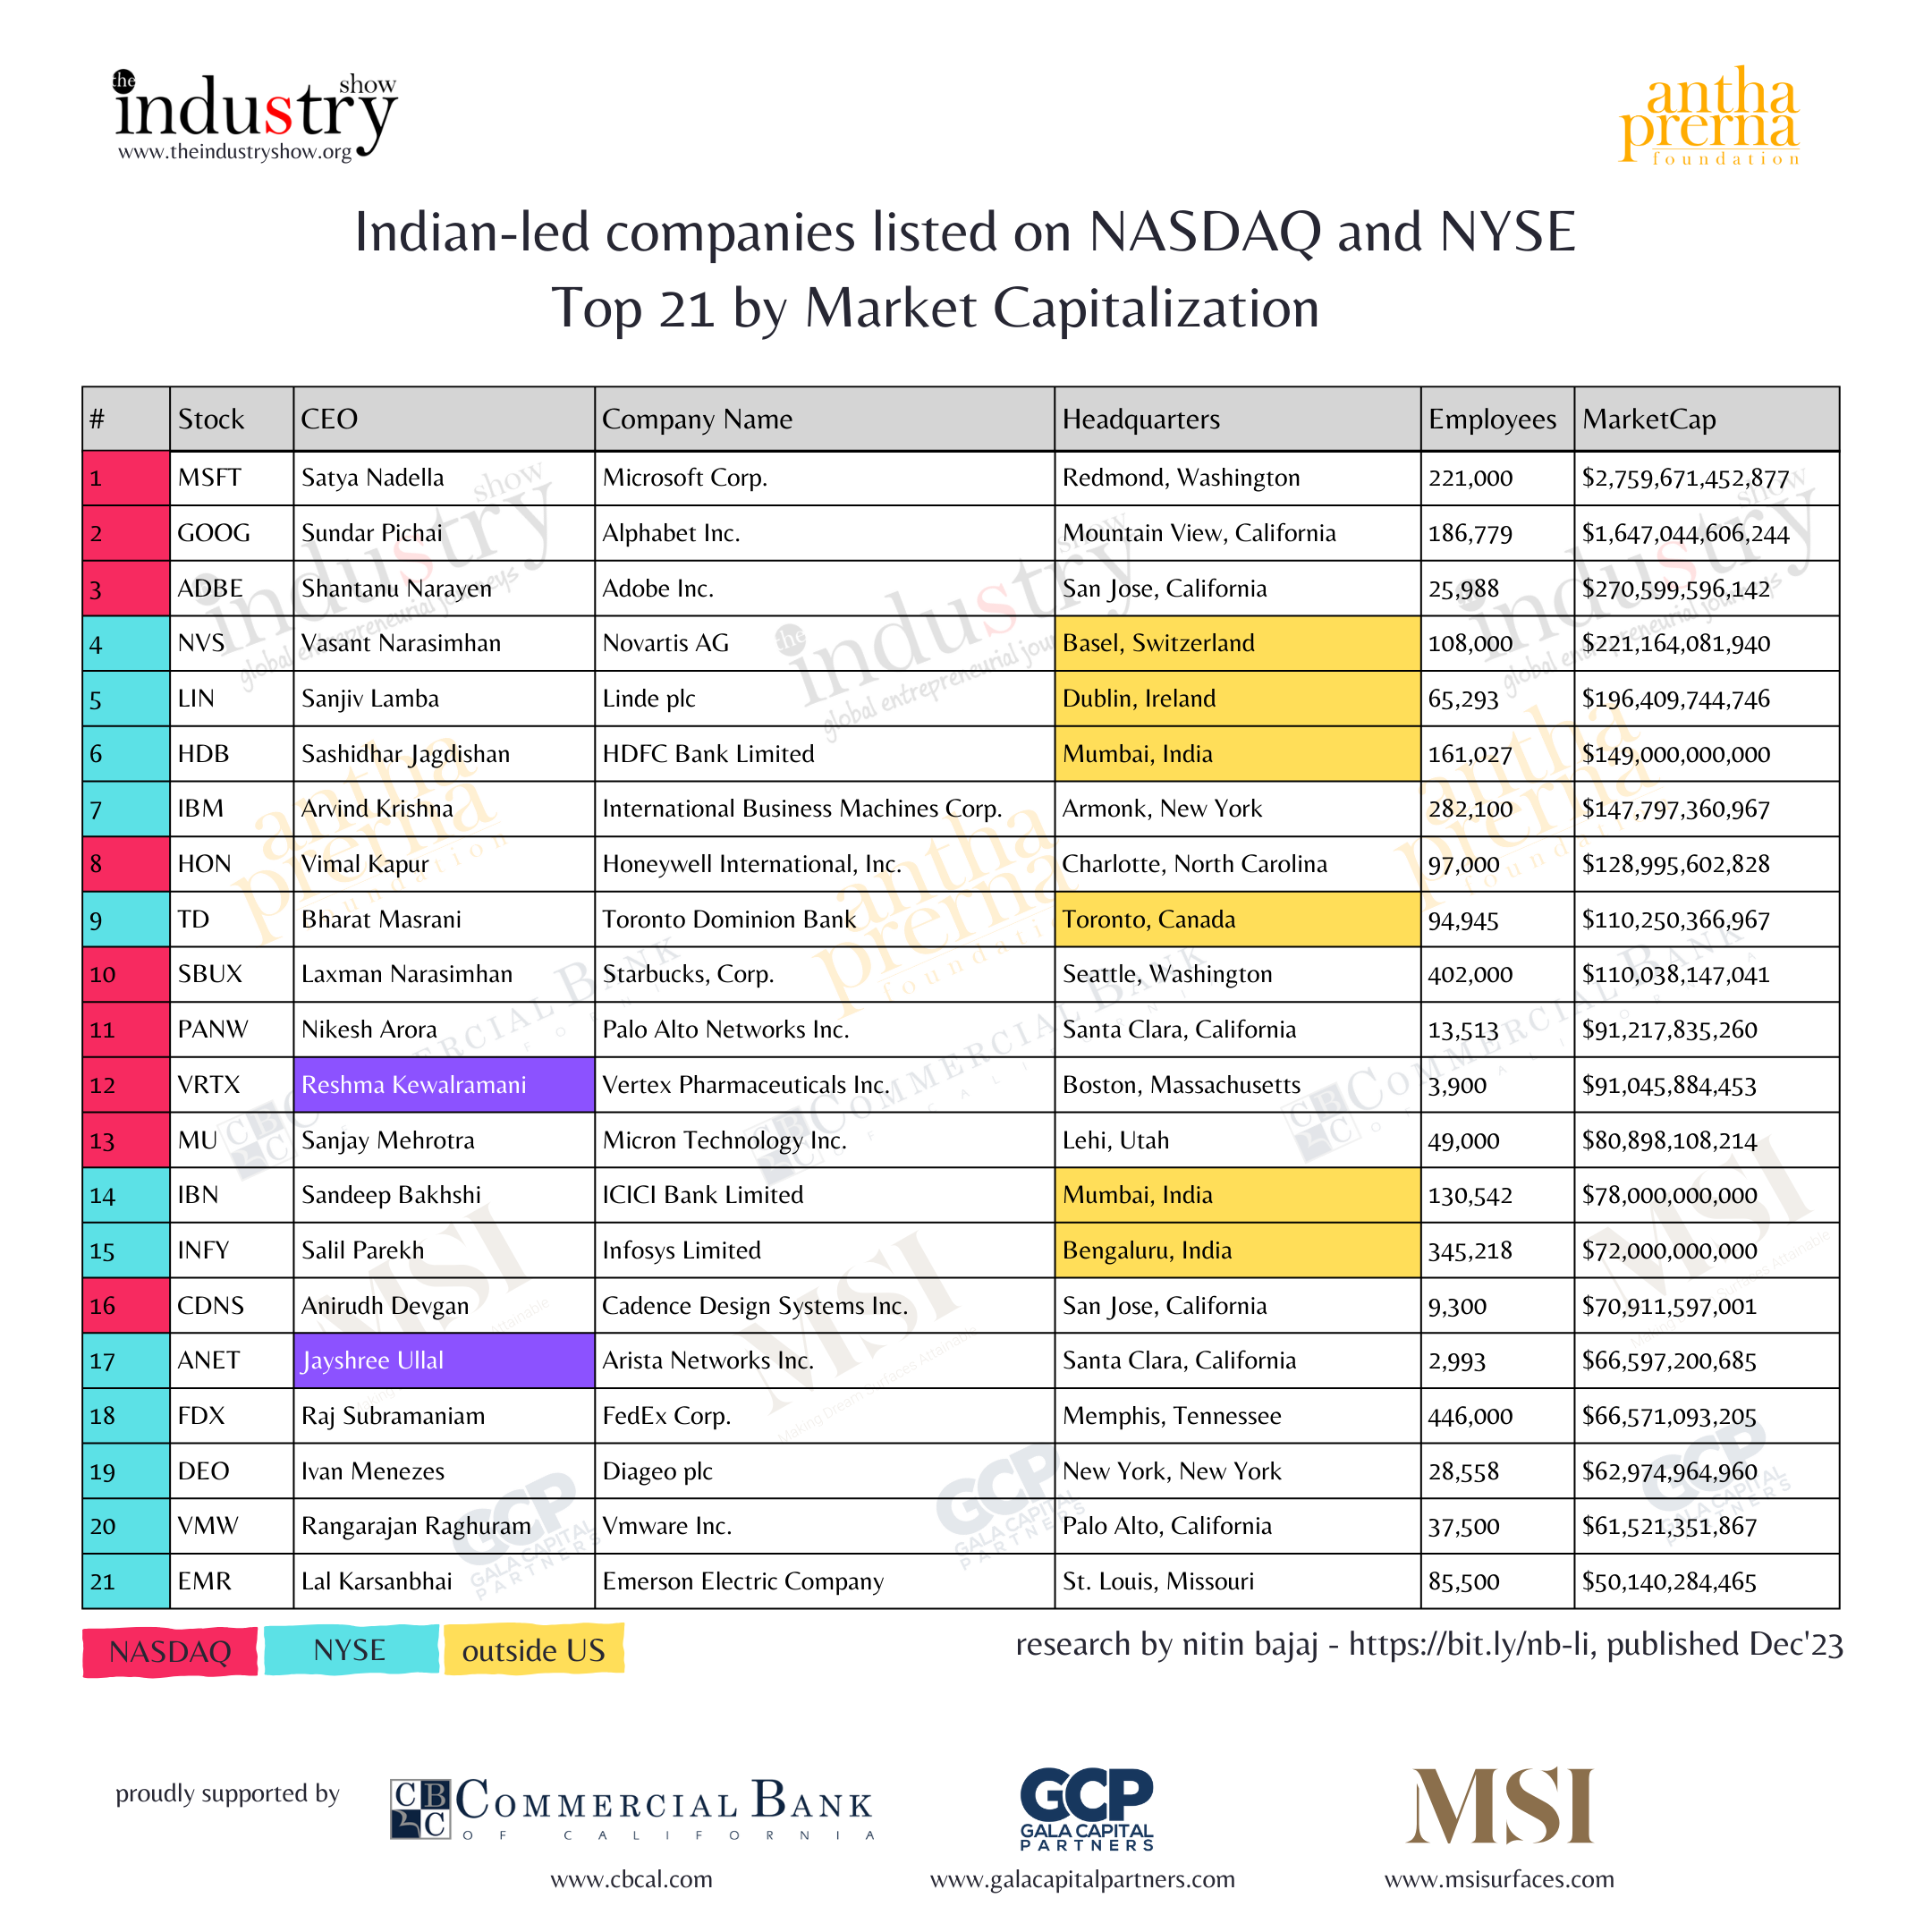 Indian-led companies listed on NASDAQ and NYSE Top 21 by Market Capitalization